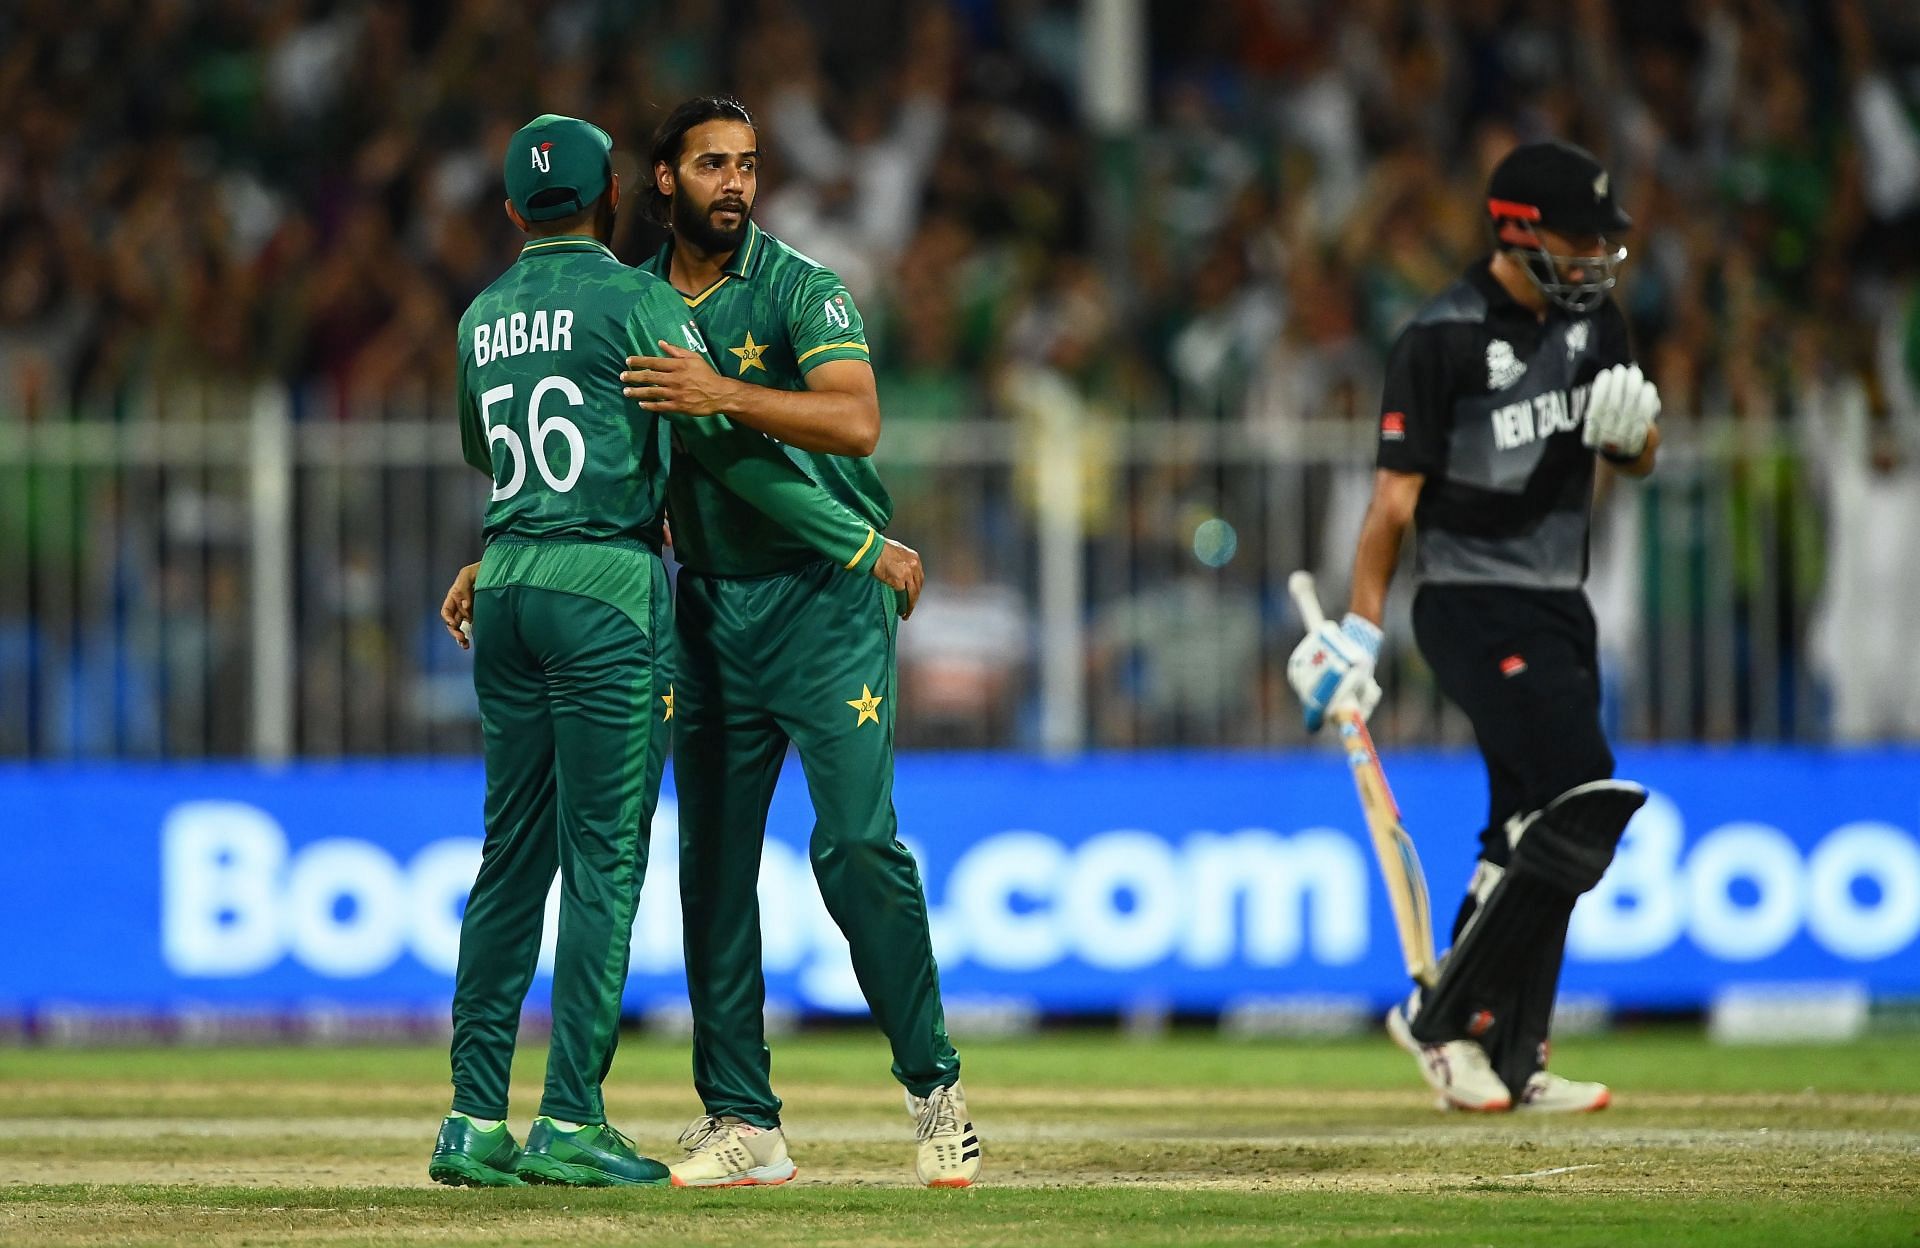 Imad Wasim celebrates the wicket of Daryl Mitchell with this skipper Babar Azam.